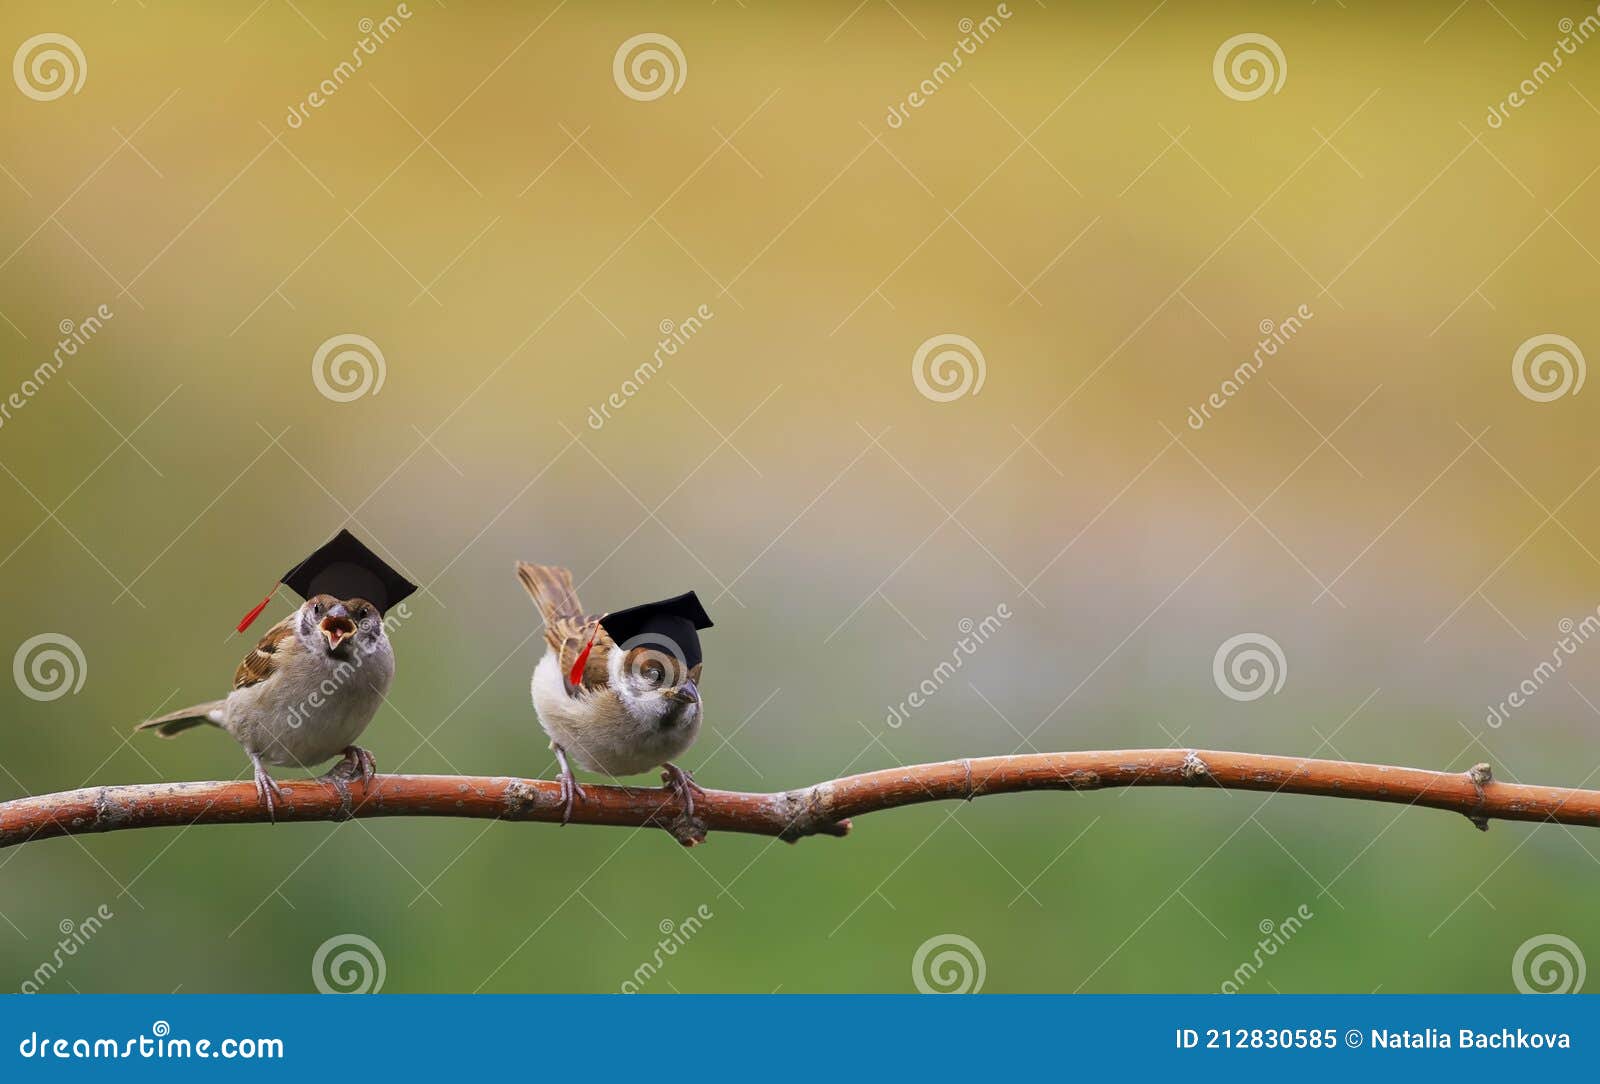 two funny sparrow birds are sitting in the spring garden in the student hats of the confederacy